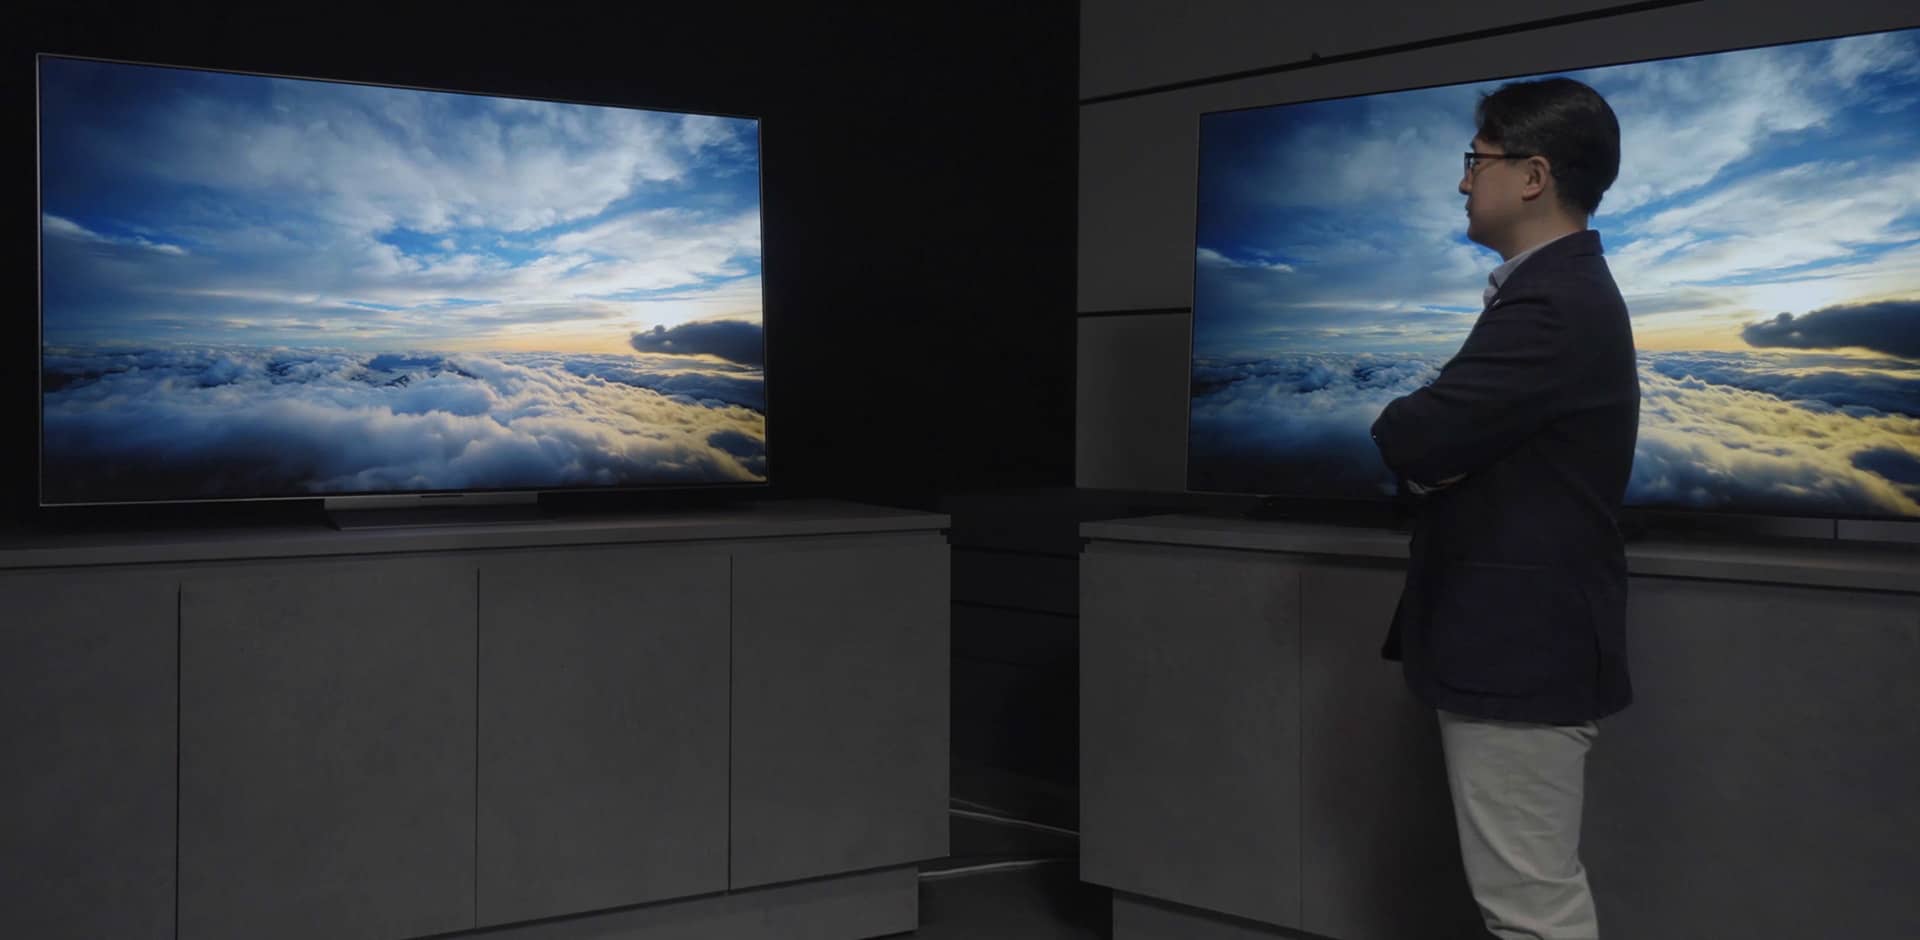 Mr.Kim is looking at two META Technology OLED displays with his arms crossed, and a cloudy sky image is visible on the screen.